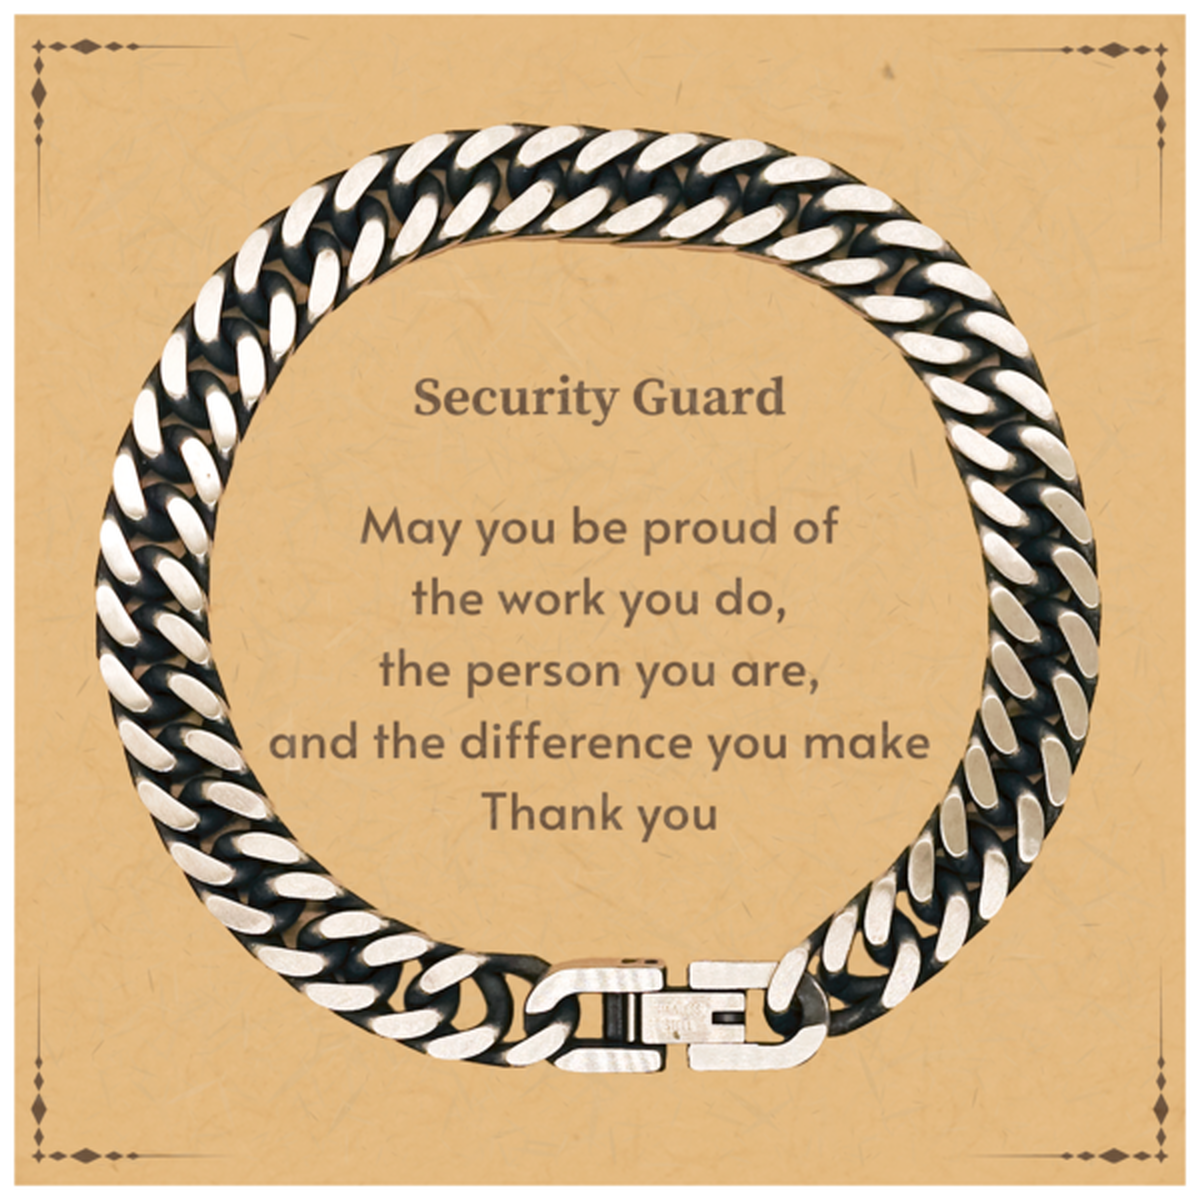 Heartwarming Cuban Link Chain Bracelet Retirement Coworkers Gifts for Security Guard, Security Guard May You be proud of the work you do, the person you are Gifts for Boss Men Women Friends